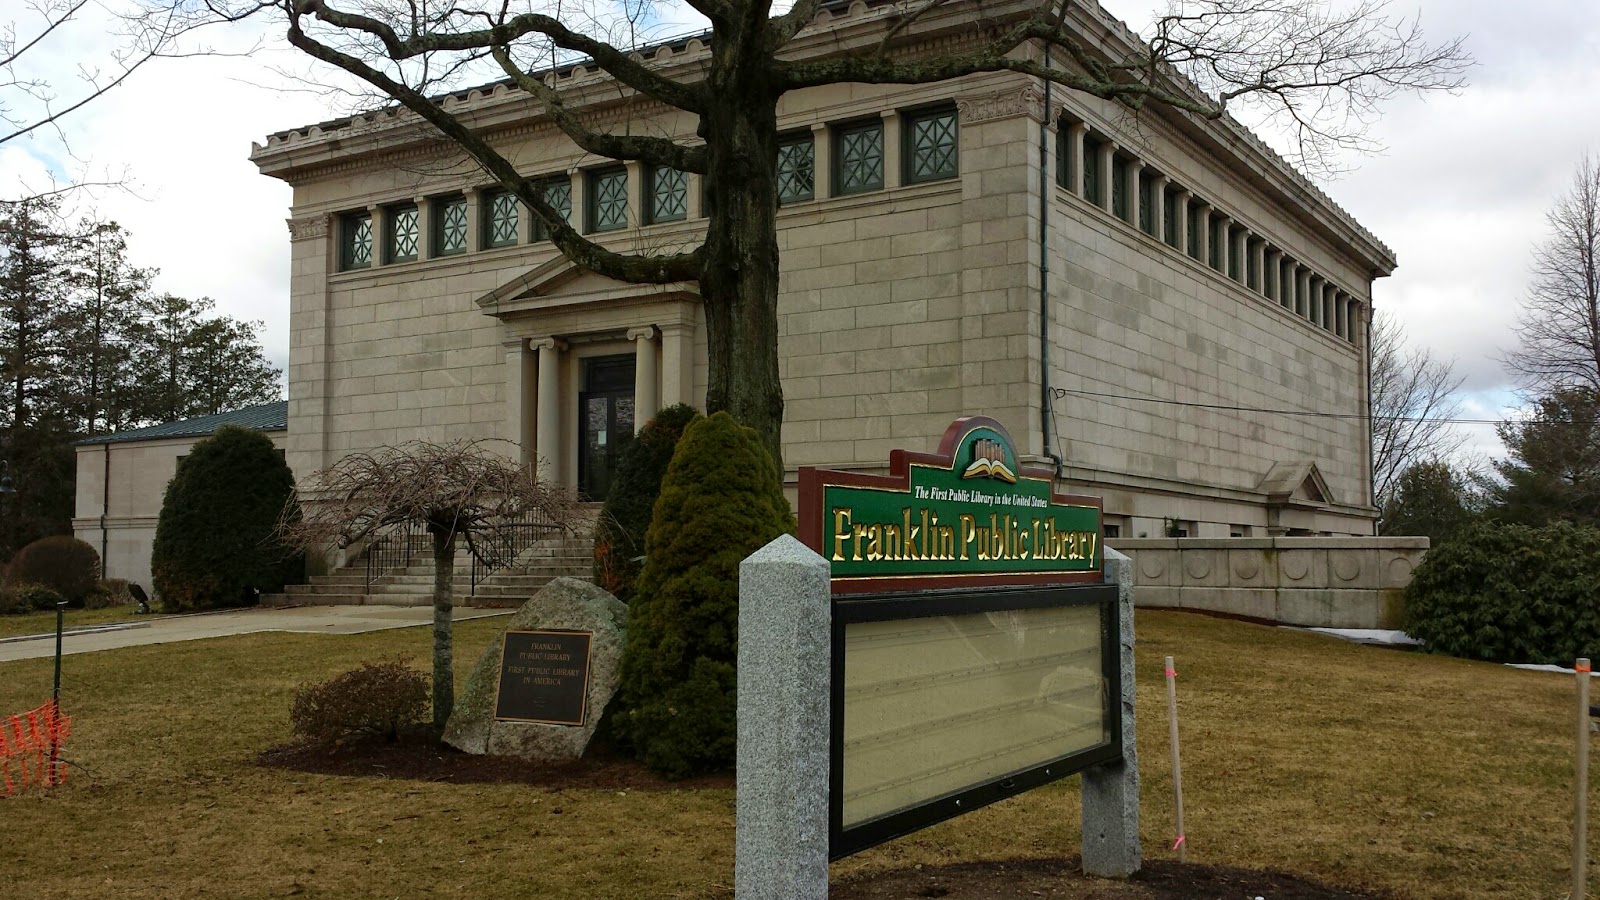 Franklin Public Library - new sign back in place after an accident took it down in Oct 2014